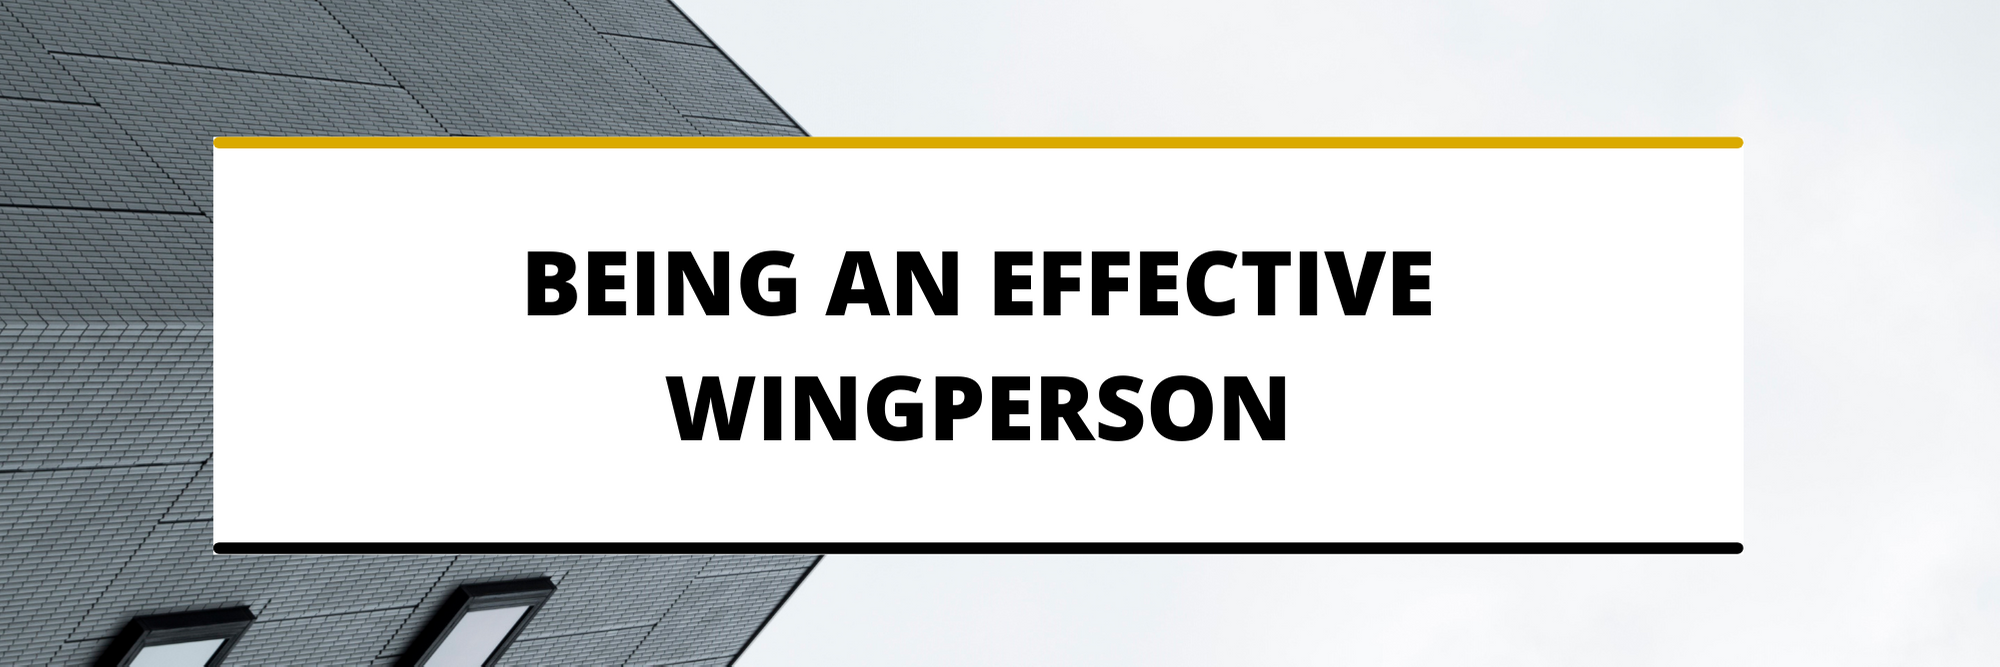 Black and white banner that says "being an effective wingperson"